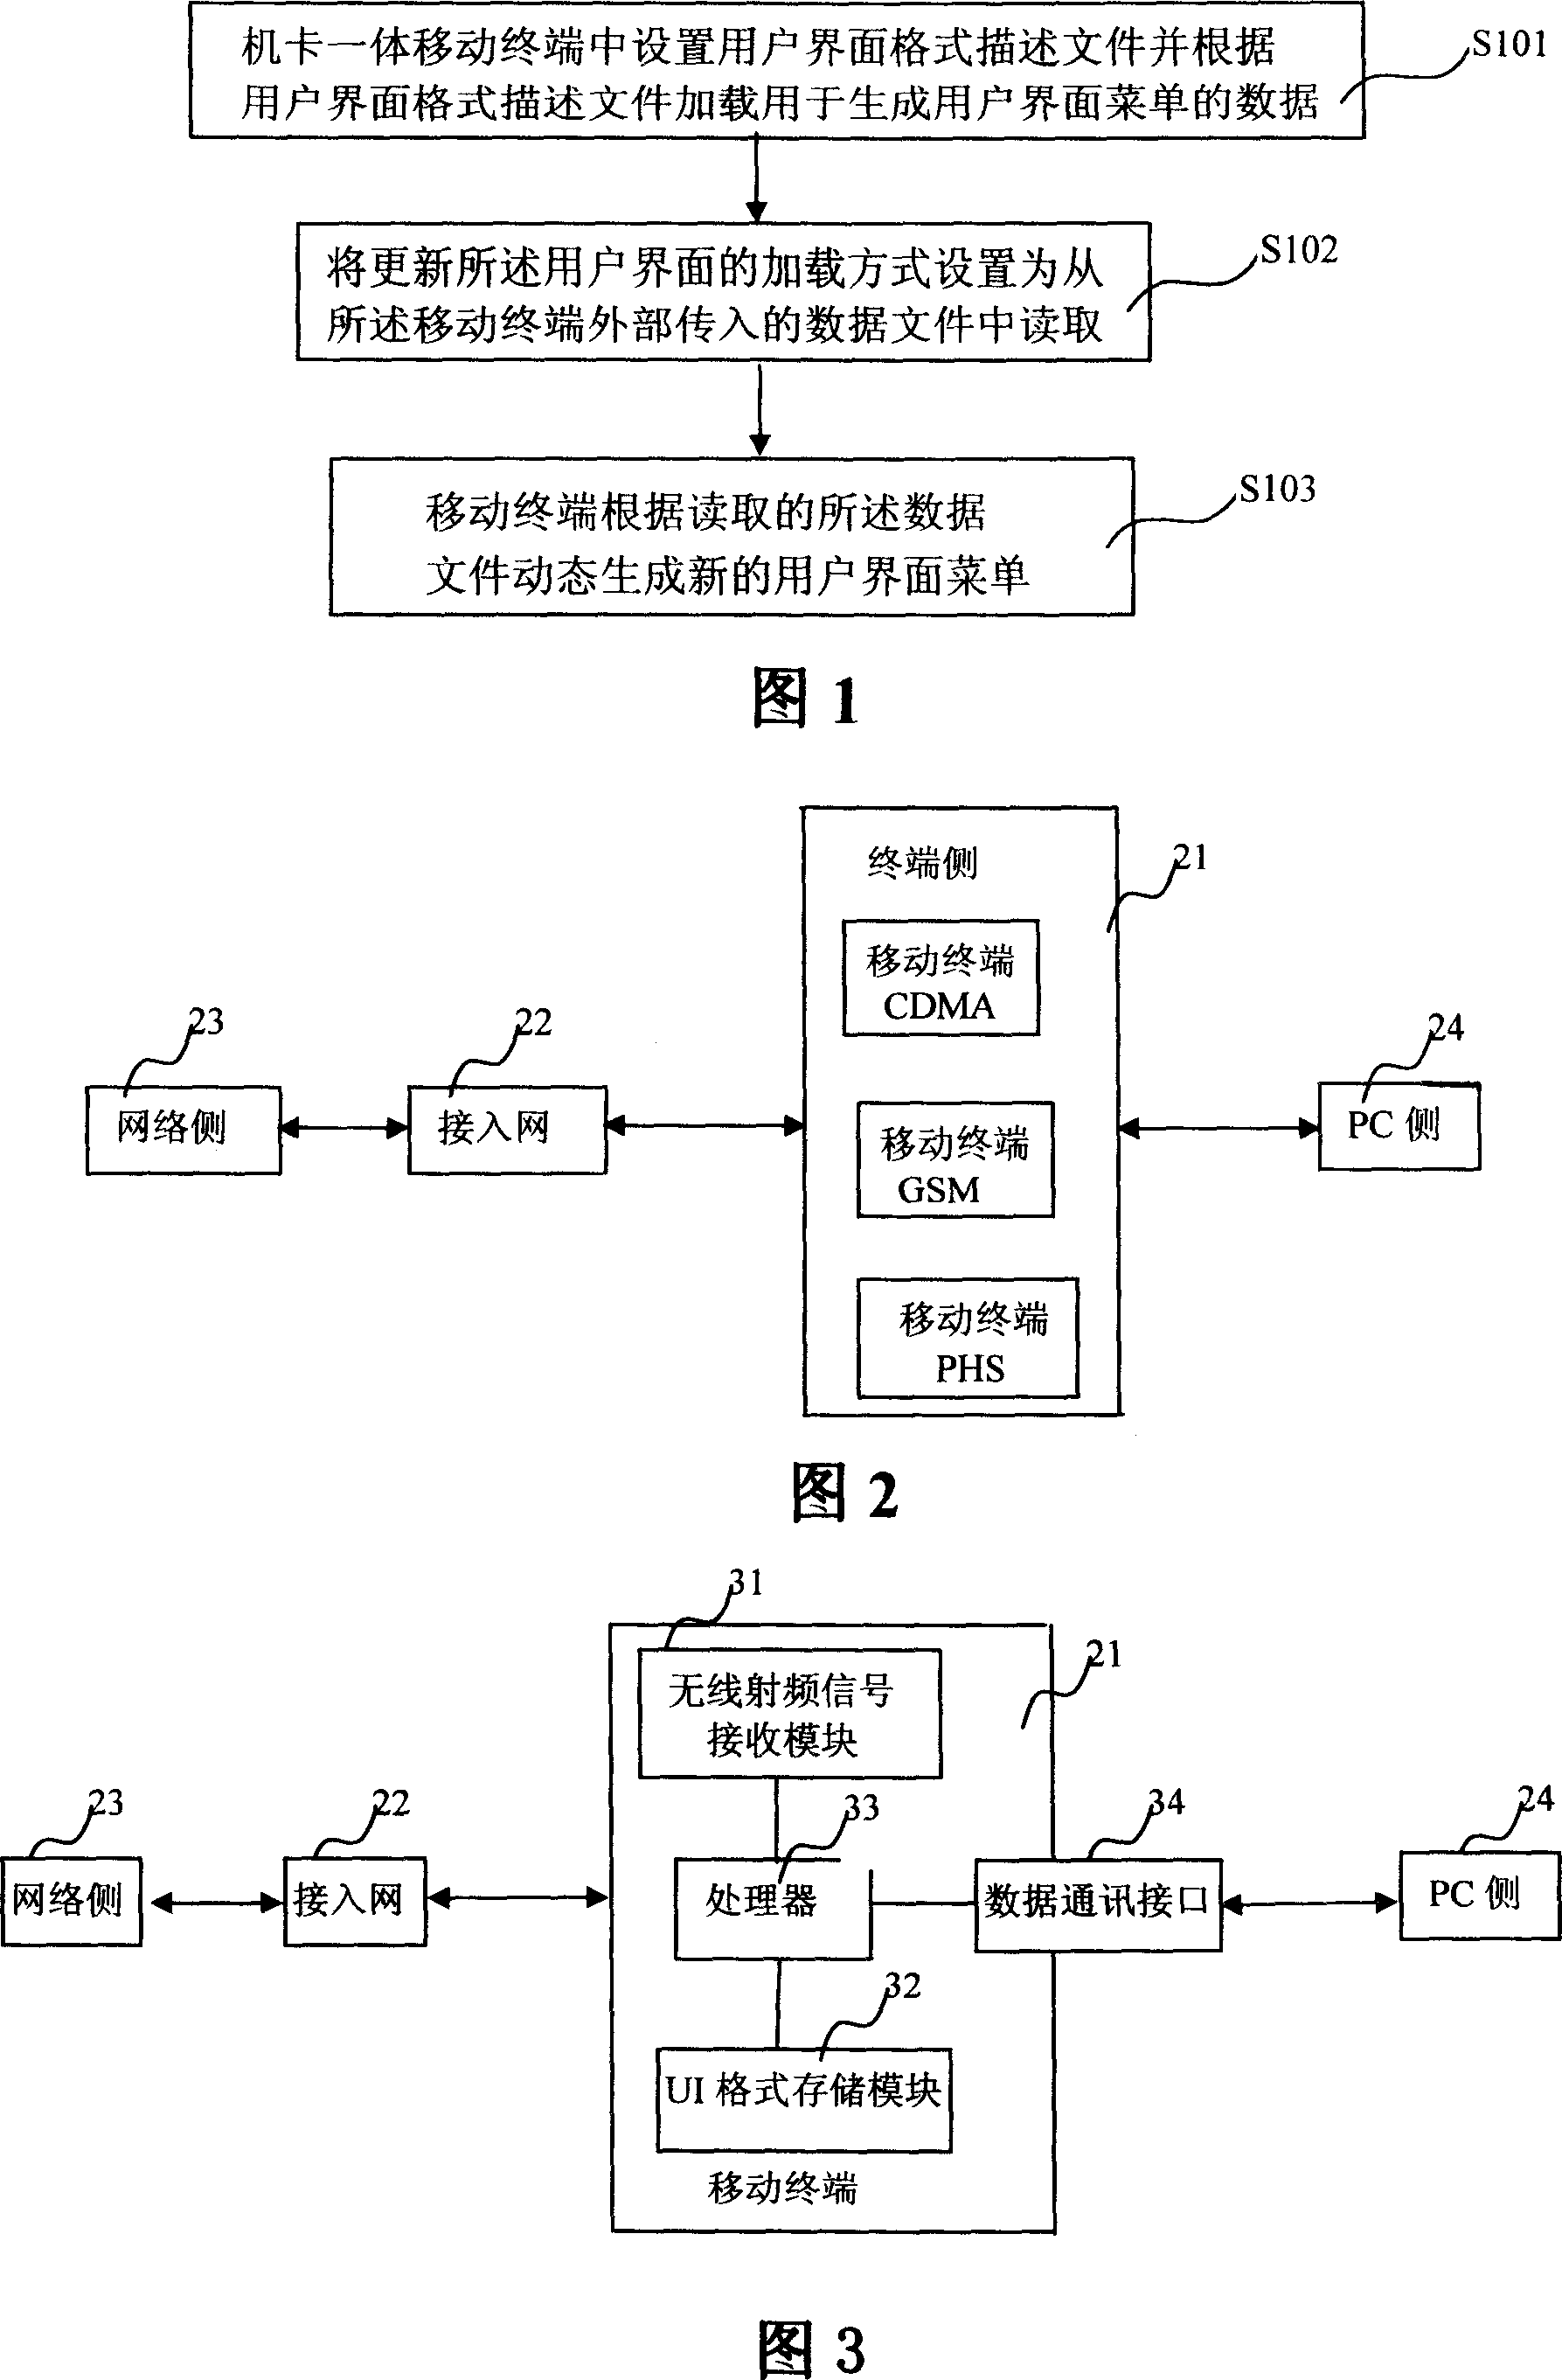 A method for update of mobile terminal subscriber interface